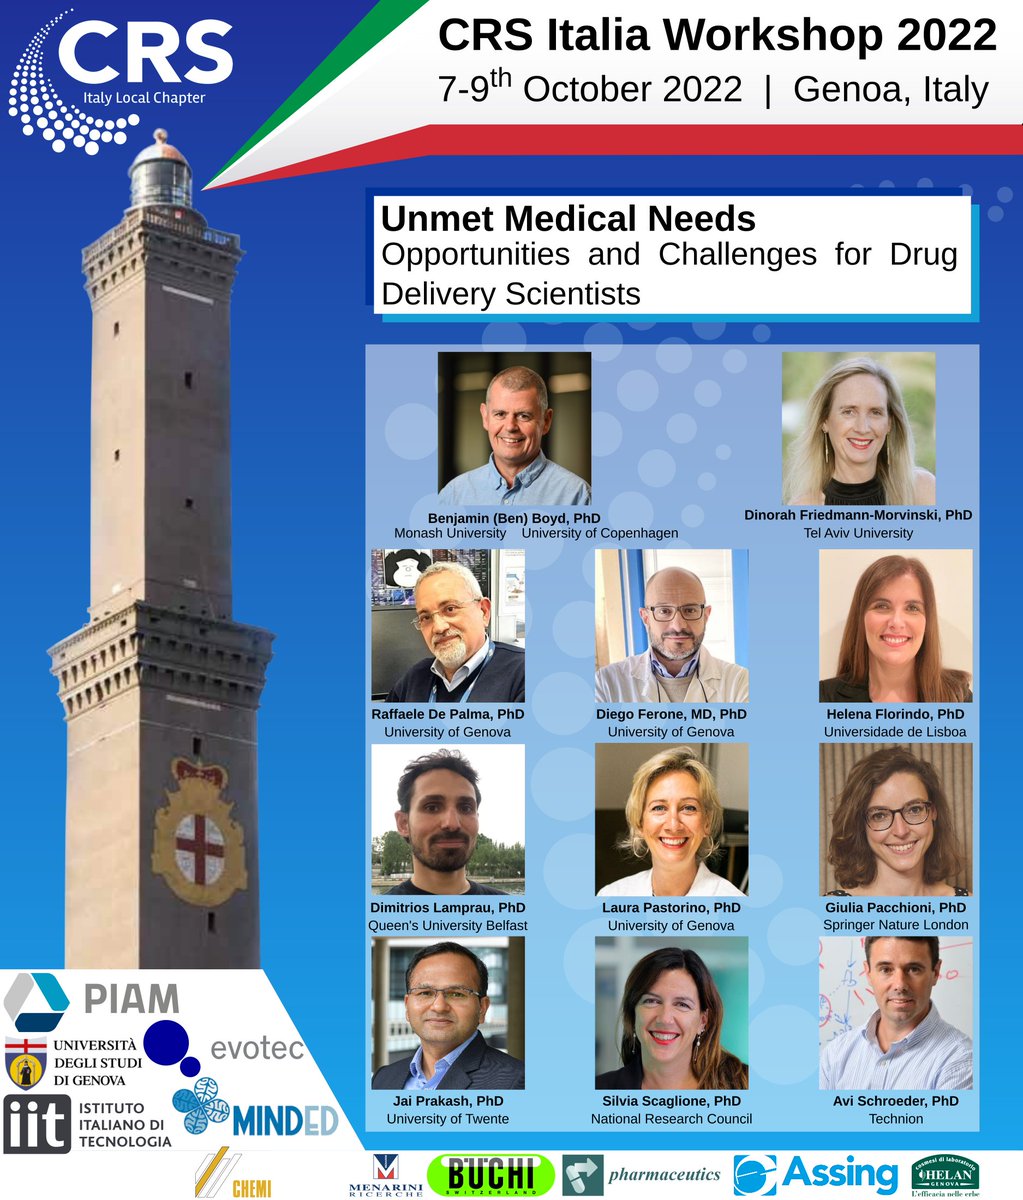 Don't miss the @CRS_Italia workshop next week (7-9 Oct) in Genoa. We're very excited about this stellar lineup! More info here: crsitalia.it/events/worksho… @UniGenova @IITalk @CRSScience